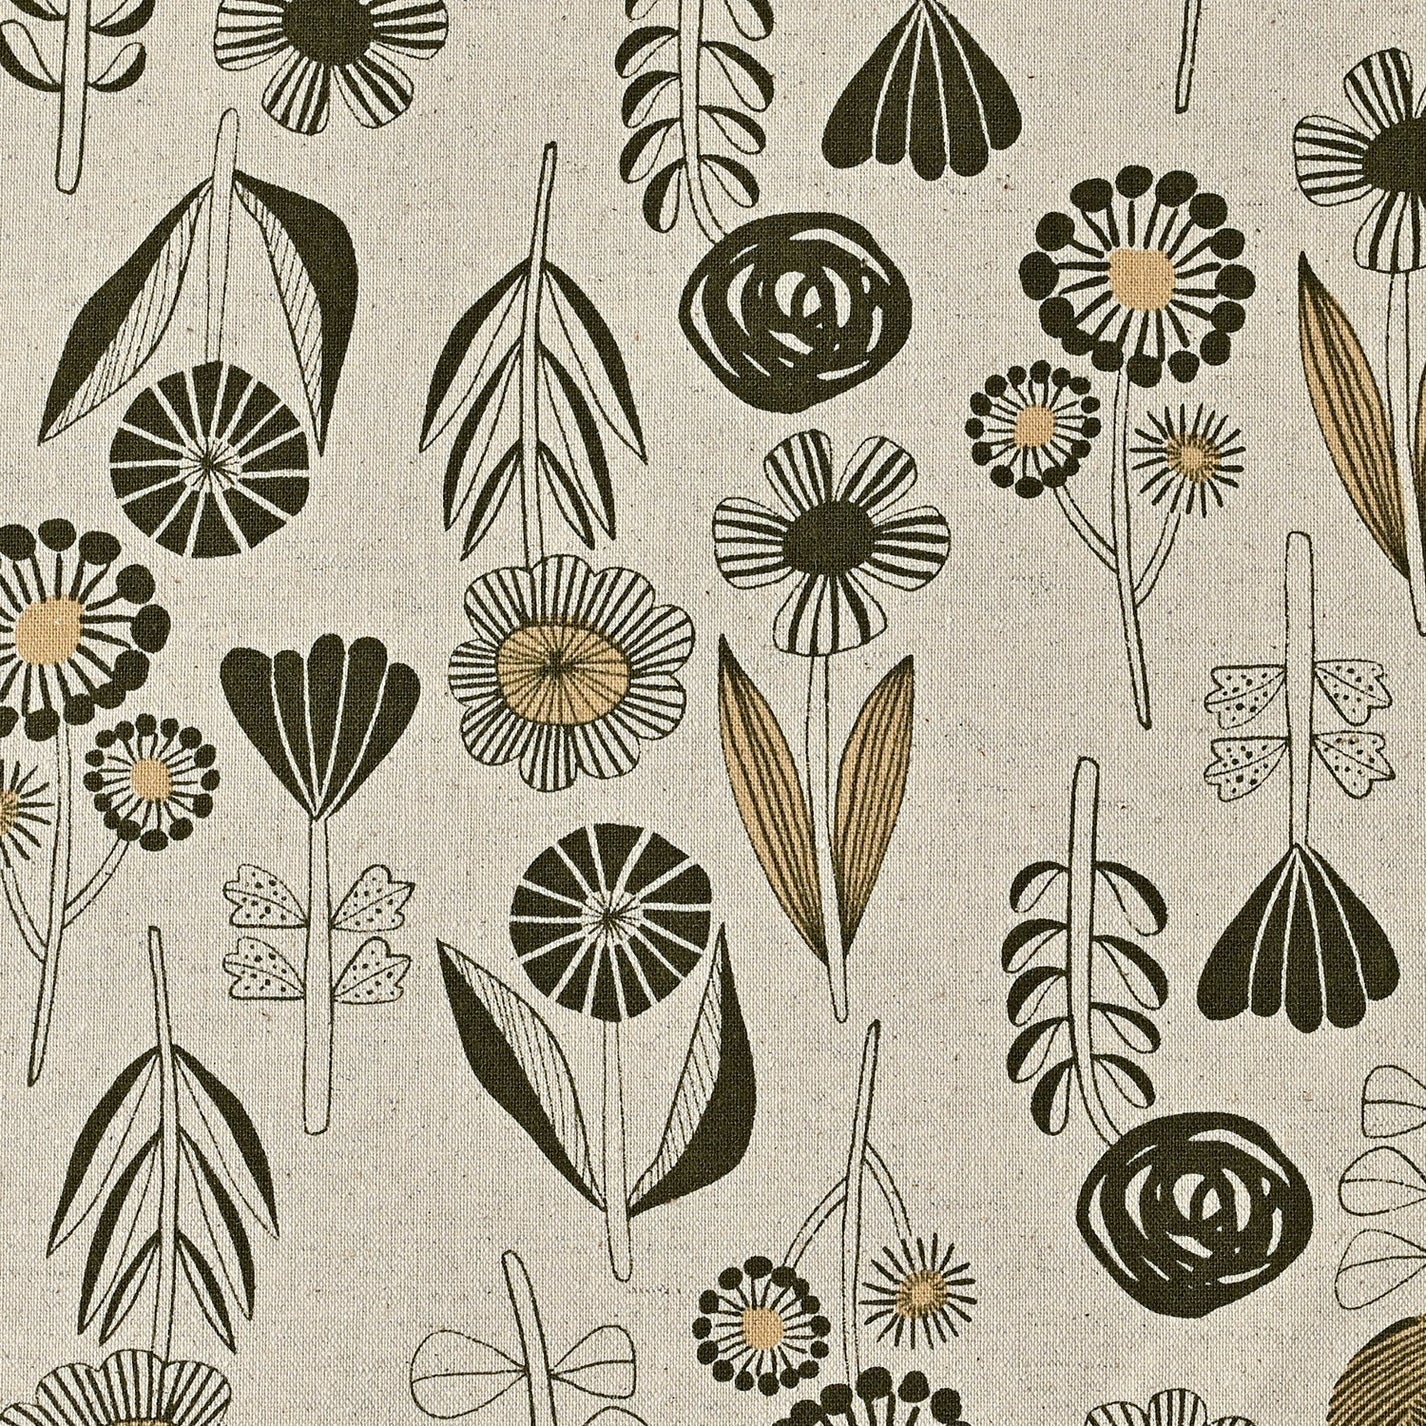 PREORDER Flower Cotton Linen Canvas - Bloom by Bookhou - homesewn